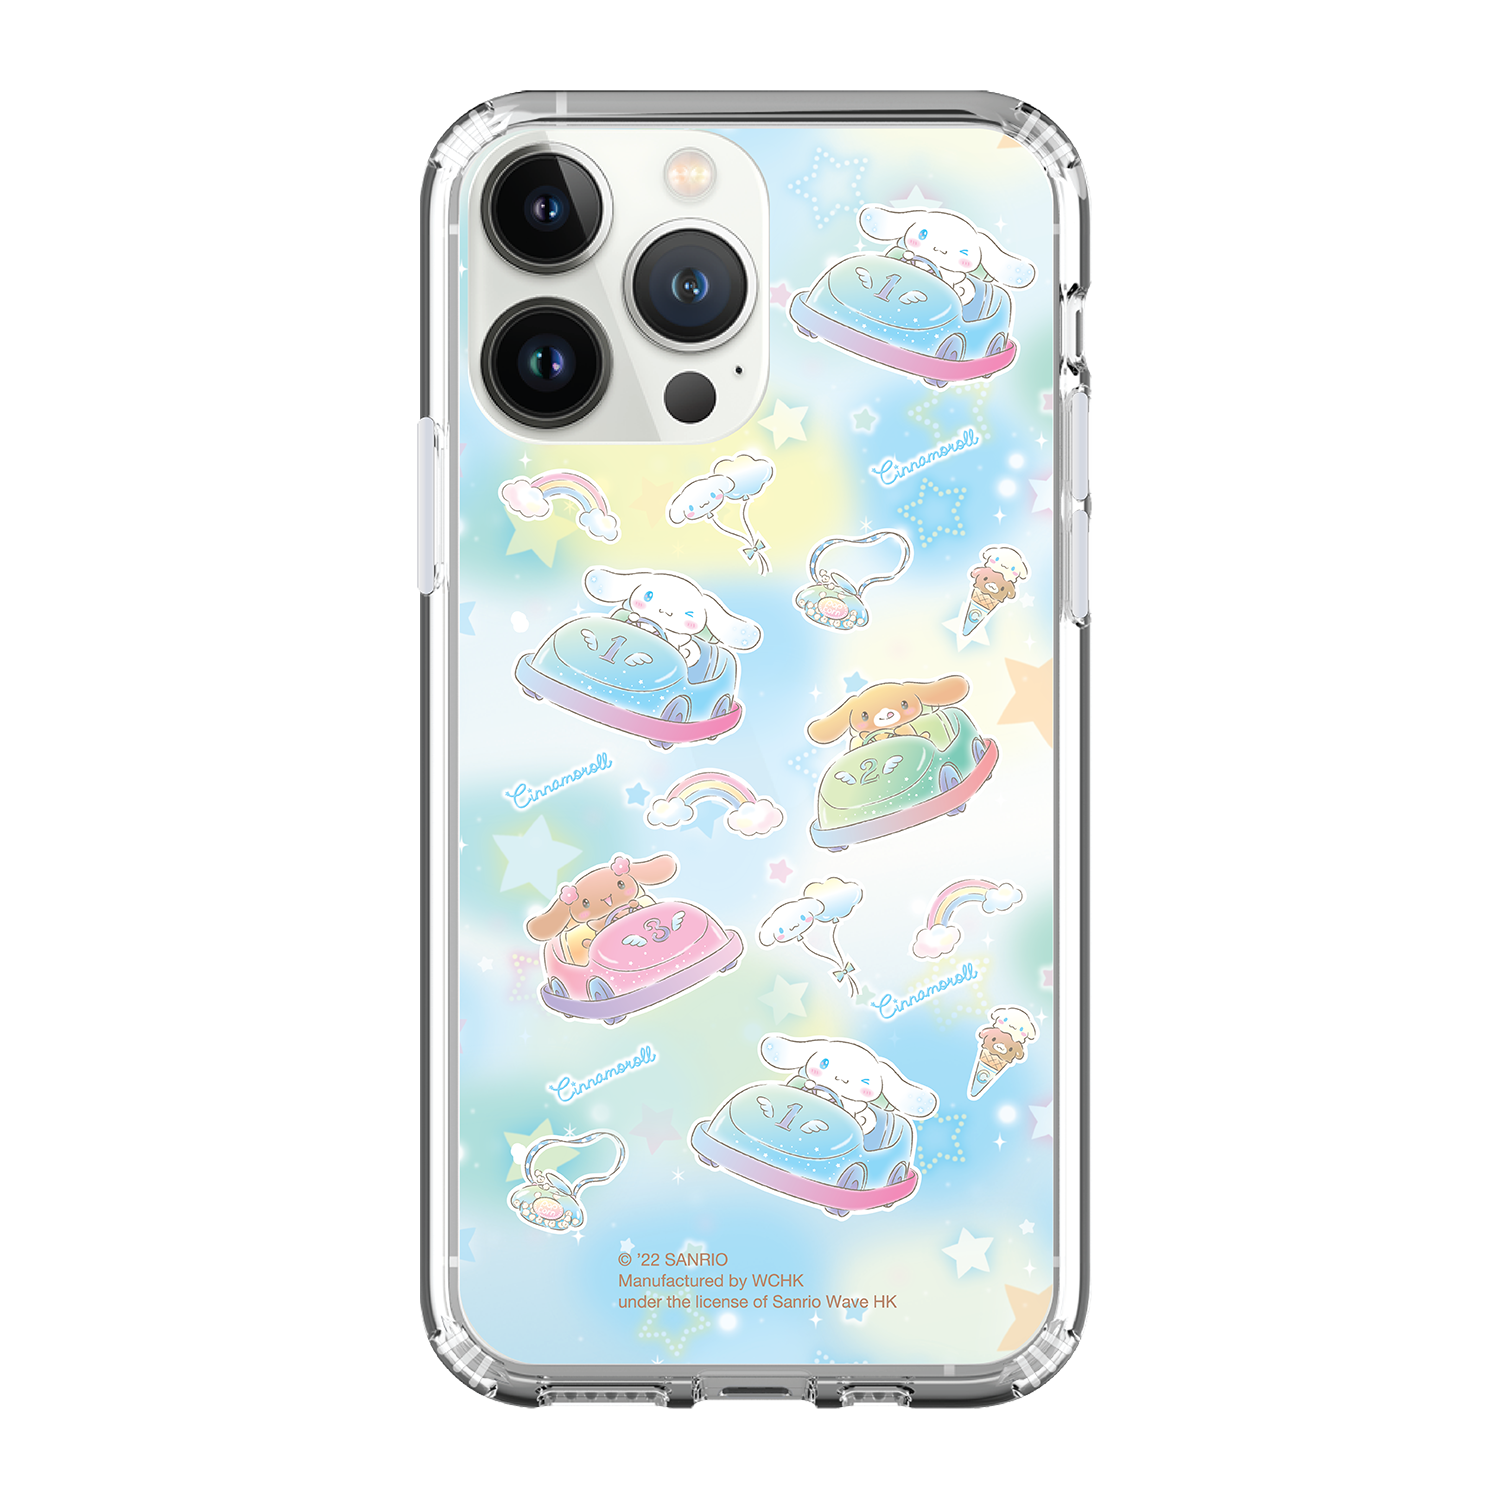 Cinnamoroll Clear Case / iPhone Case / Android Case / Samsung Case 防撞透明手機殼 (CN119)